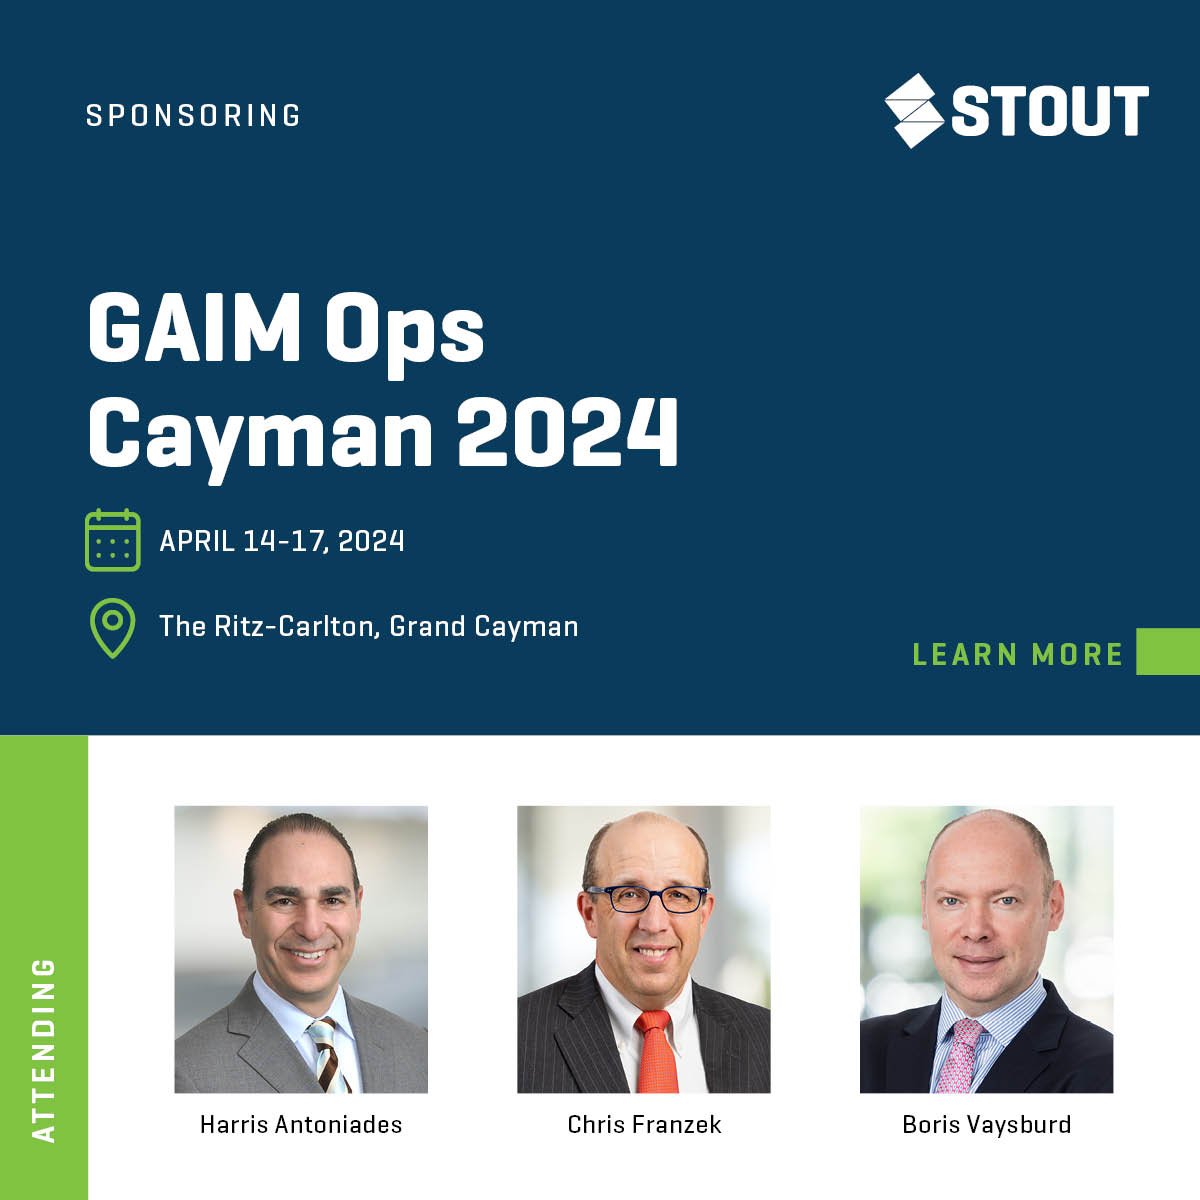 Stout is proud to sponsor the premier GAIM Ops Cayman event on April 14 -17, 2024. Join us to connect with Stout attendees Harris Antoniades, Chris Franzek, and Boris Vaysburd. Learn more about the event: bit.ly/4816fdb